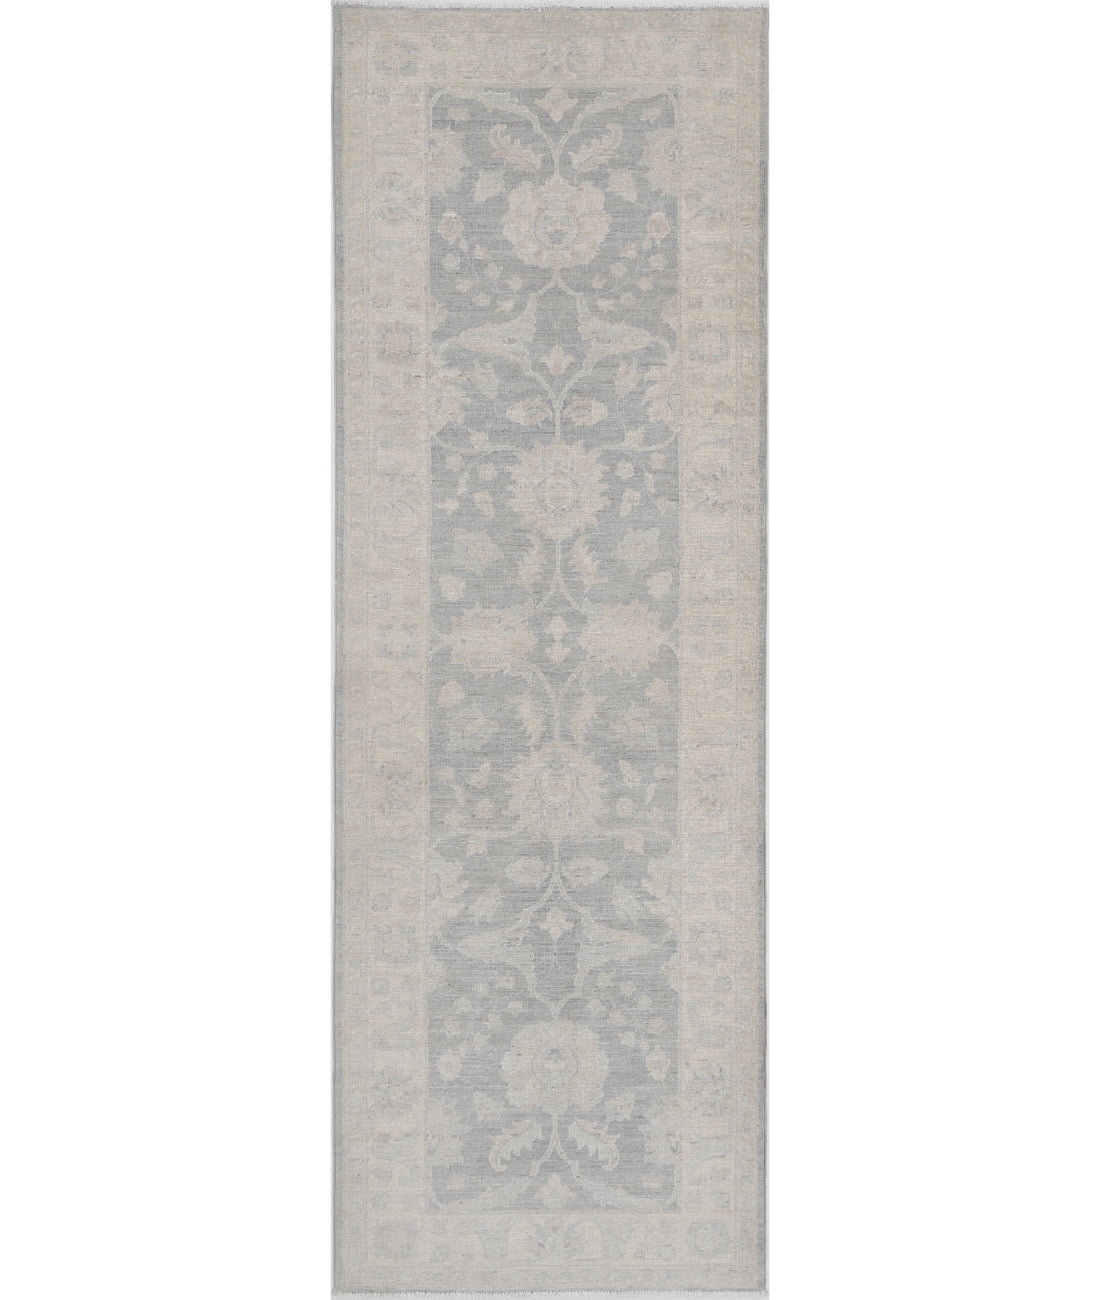 Hand Knotted Serenity Wool Rug - 2'7'' x 8'4'' 2'7'' x 8'4'' (78 X 250) / Grey / Ivory